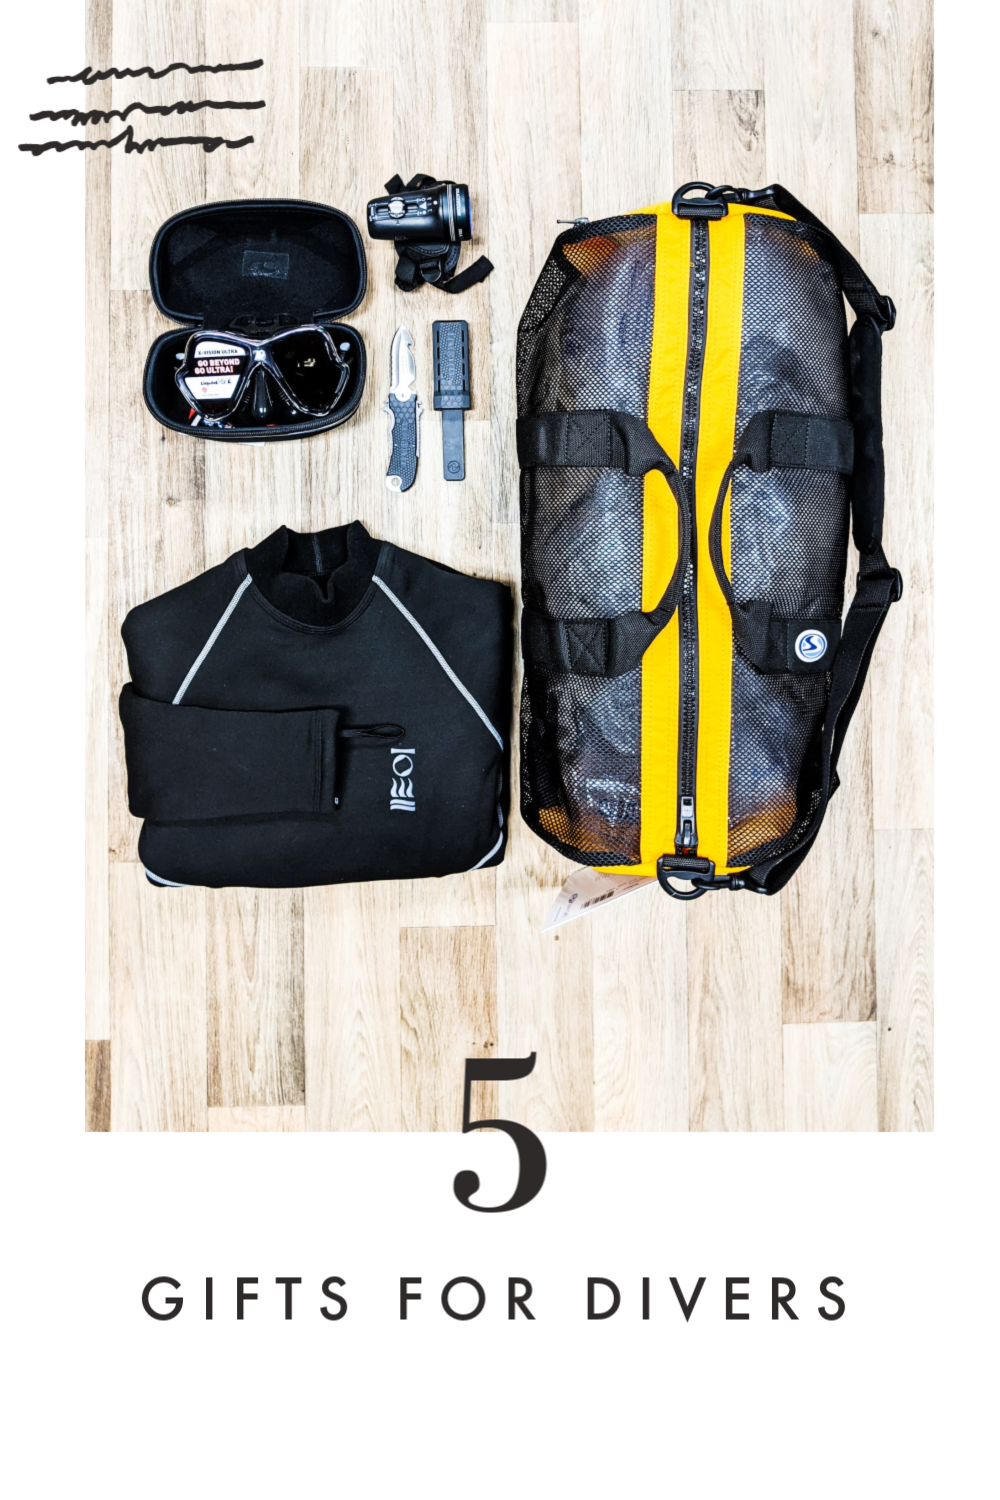 5 Gifts for Divers